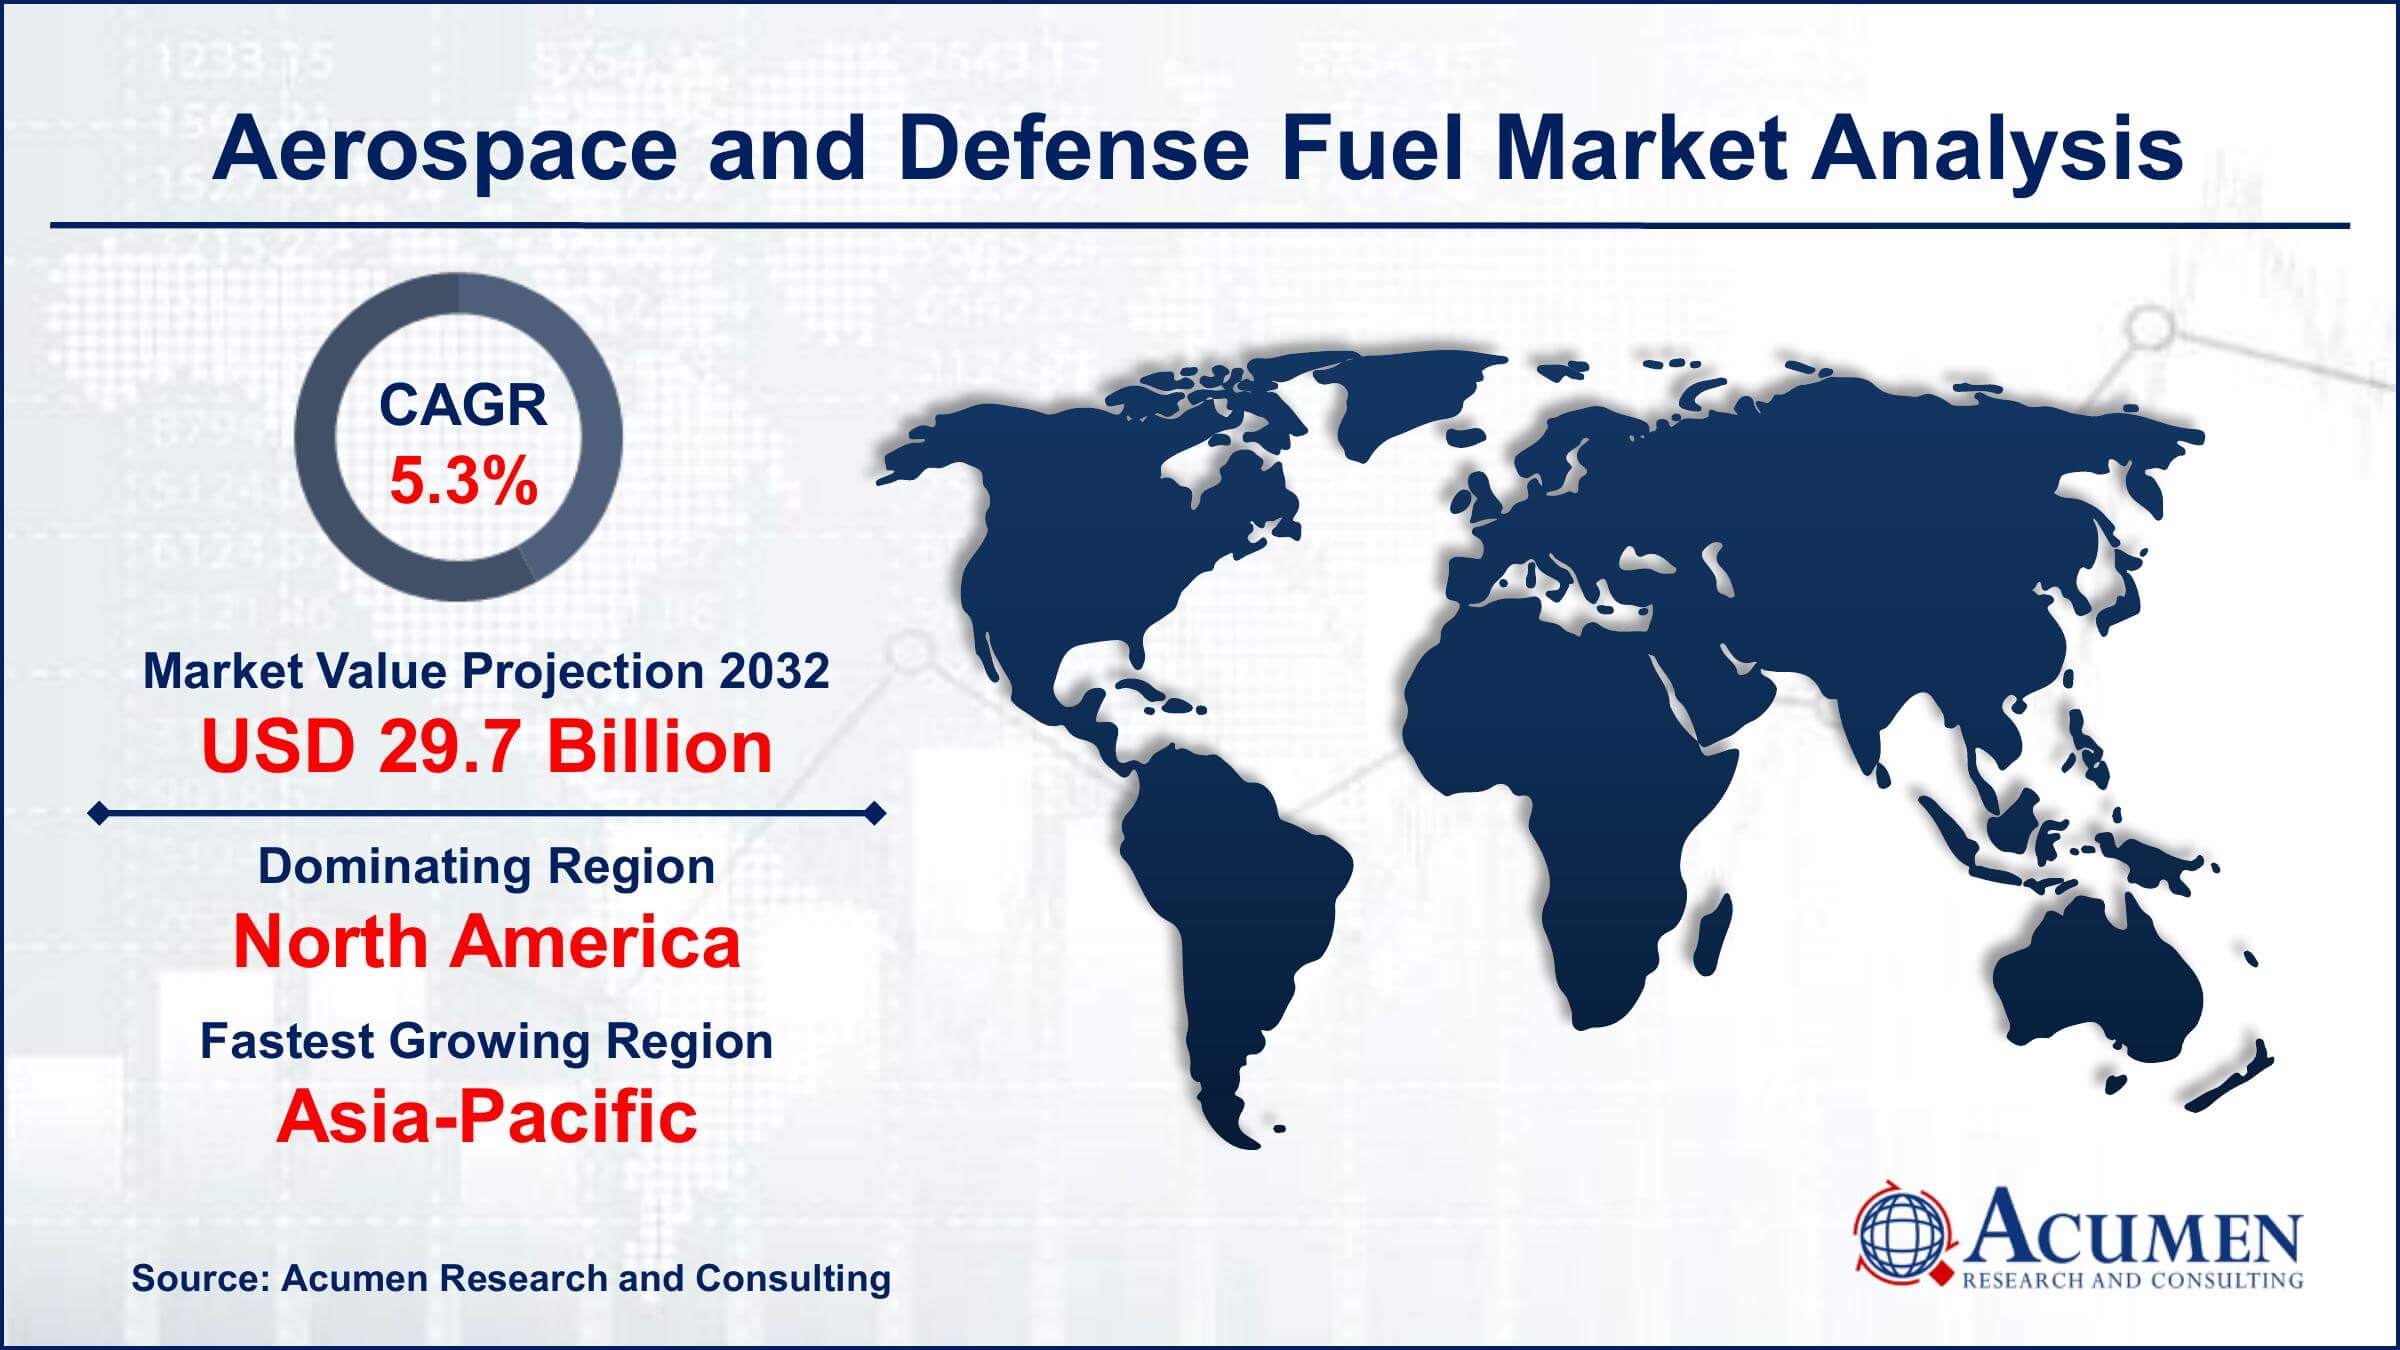 Global Aerospace and Defense Fuel Market Trends